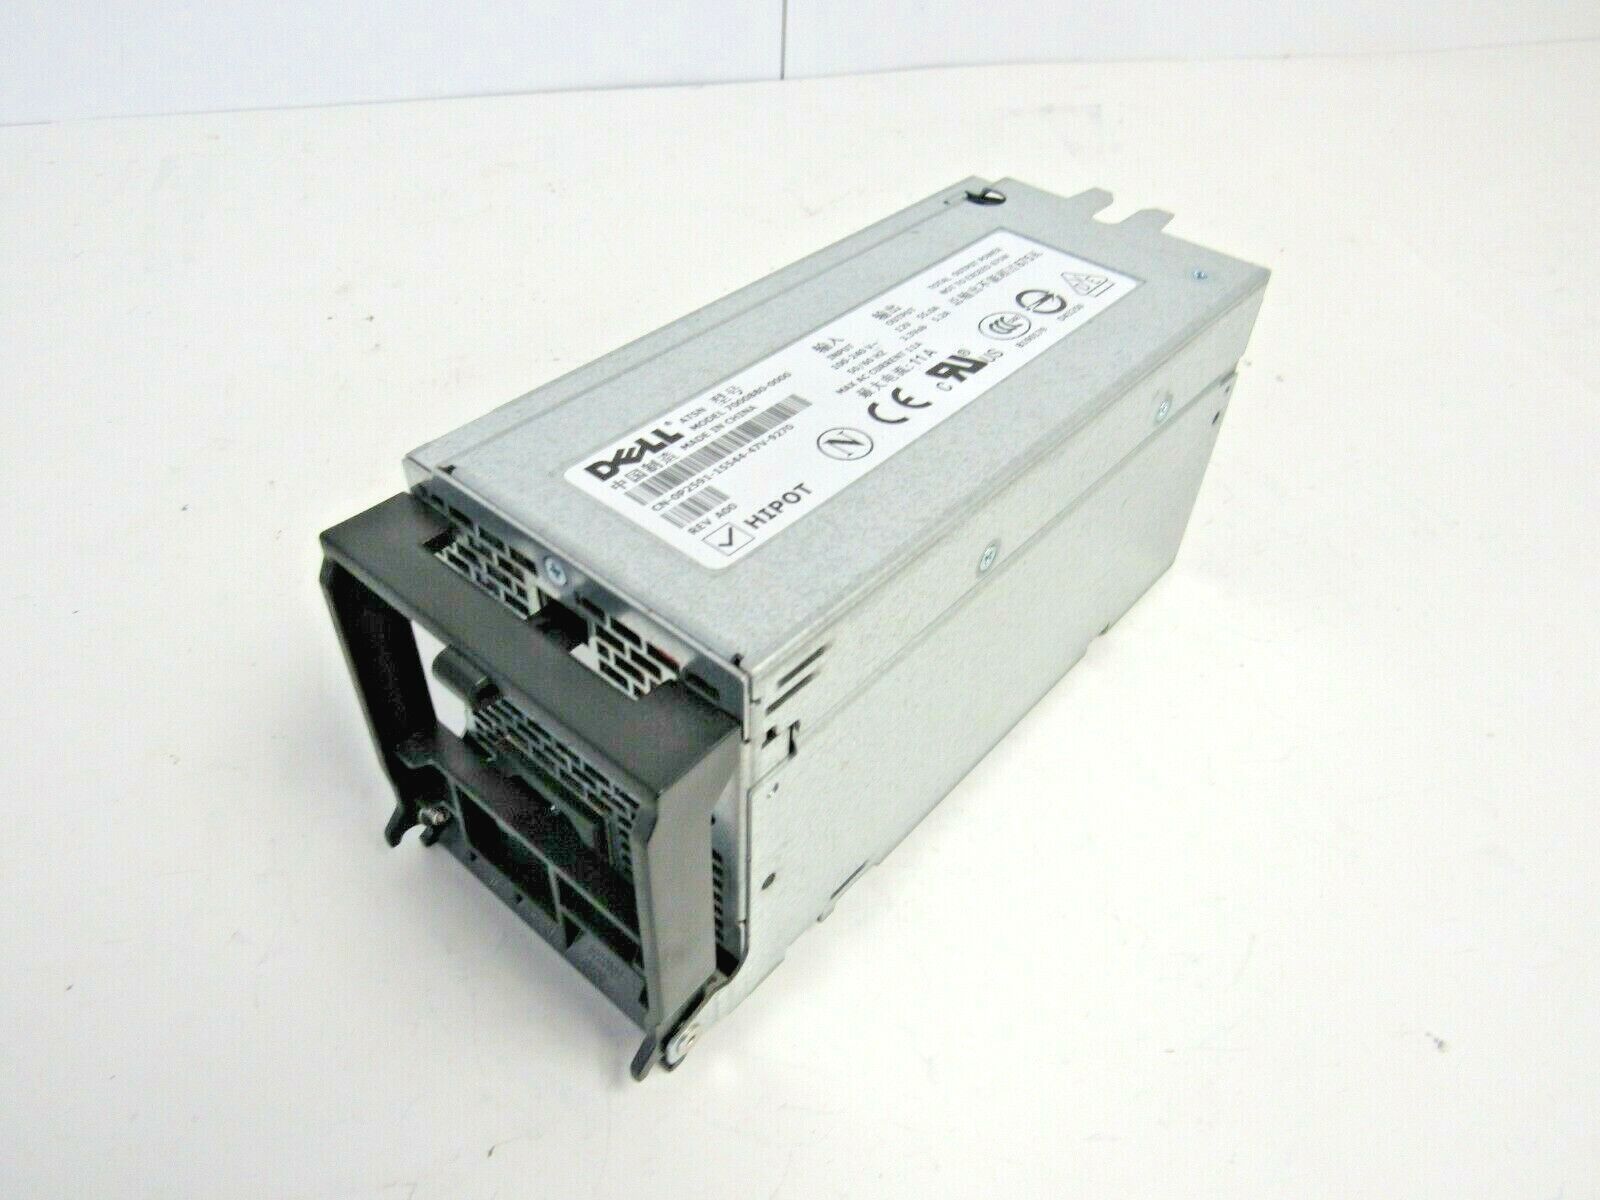 Primary image for Dell P2591 PowerEdge 1800 675W Redundant Power Supply 0P2591     27-4